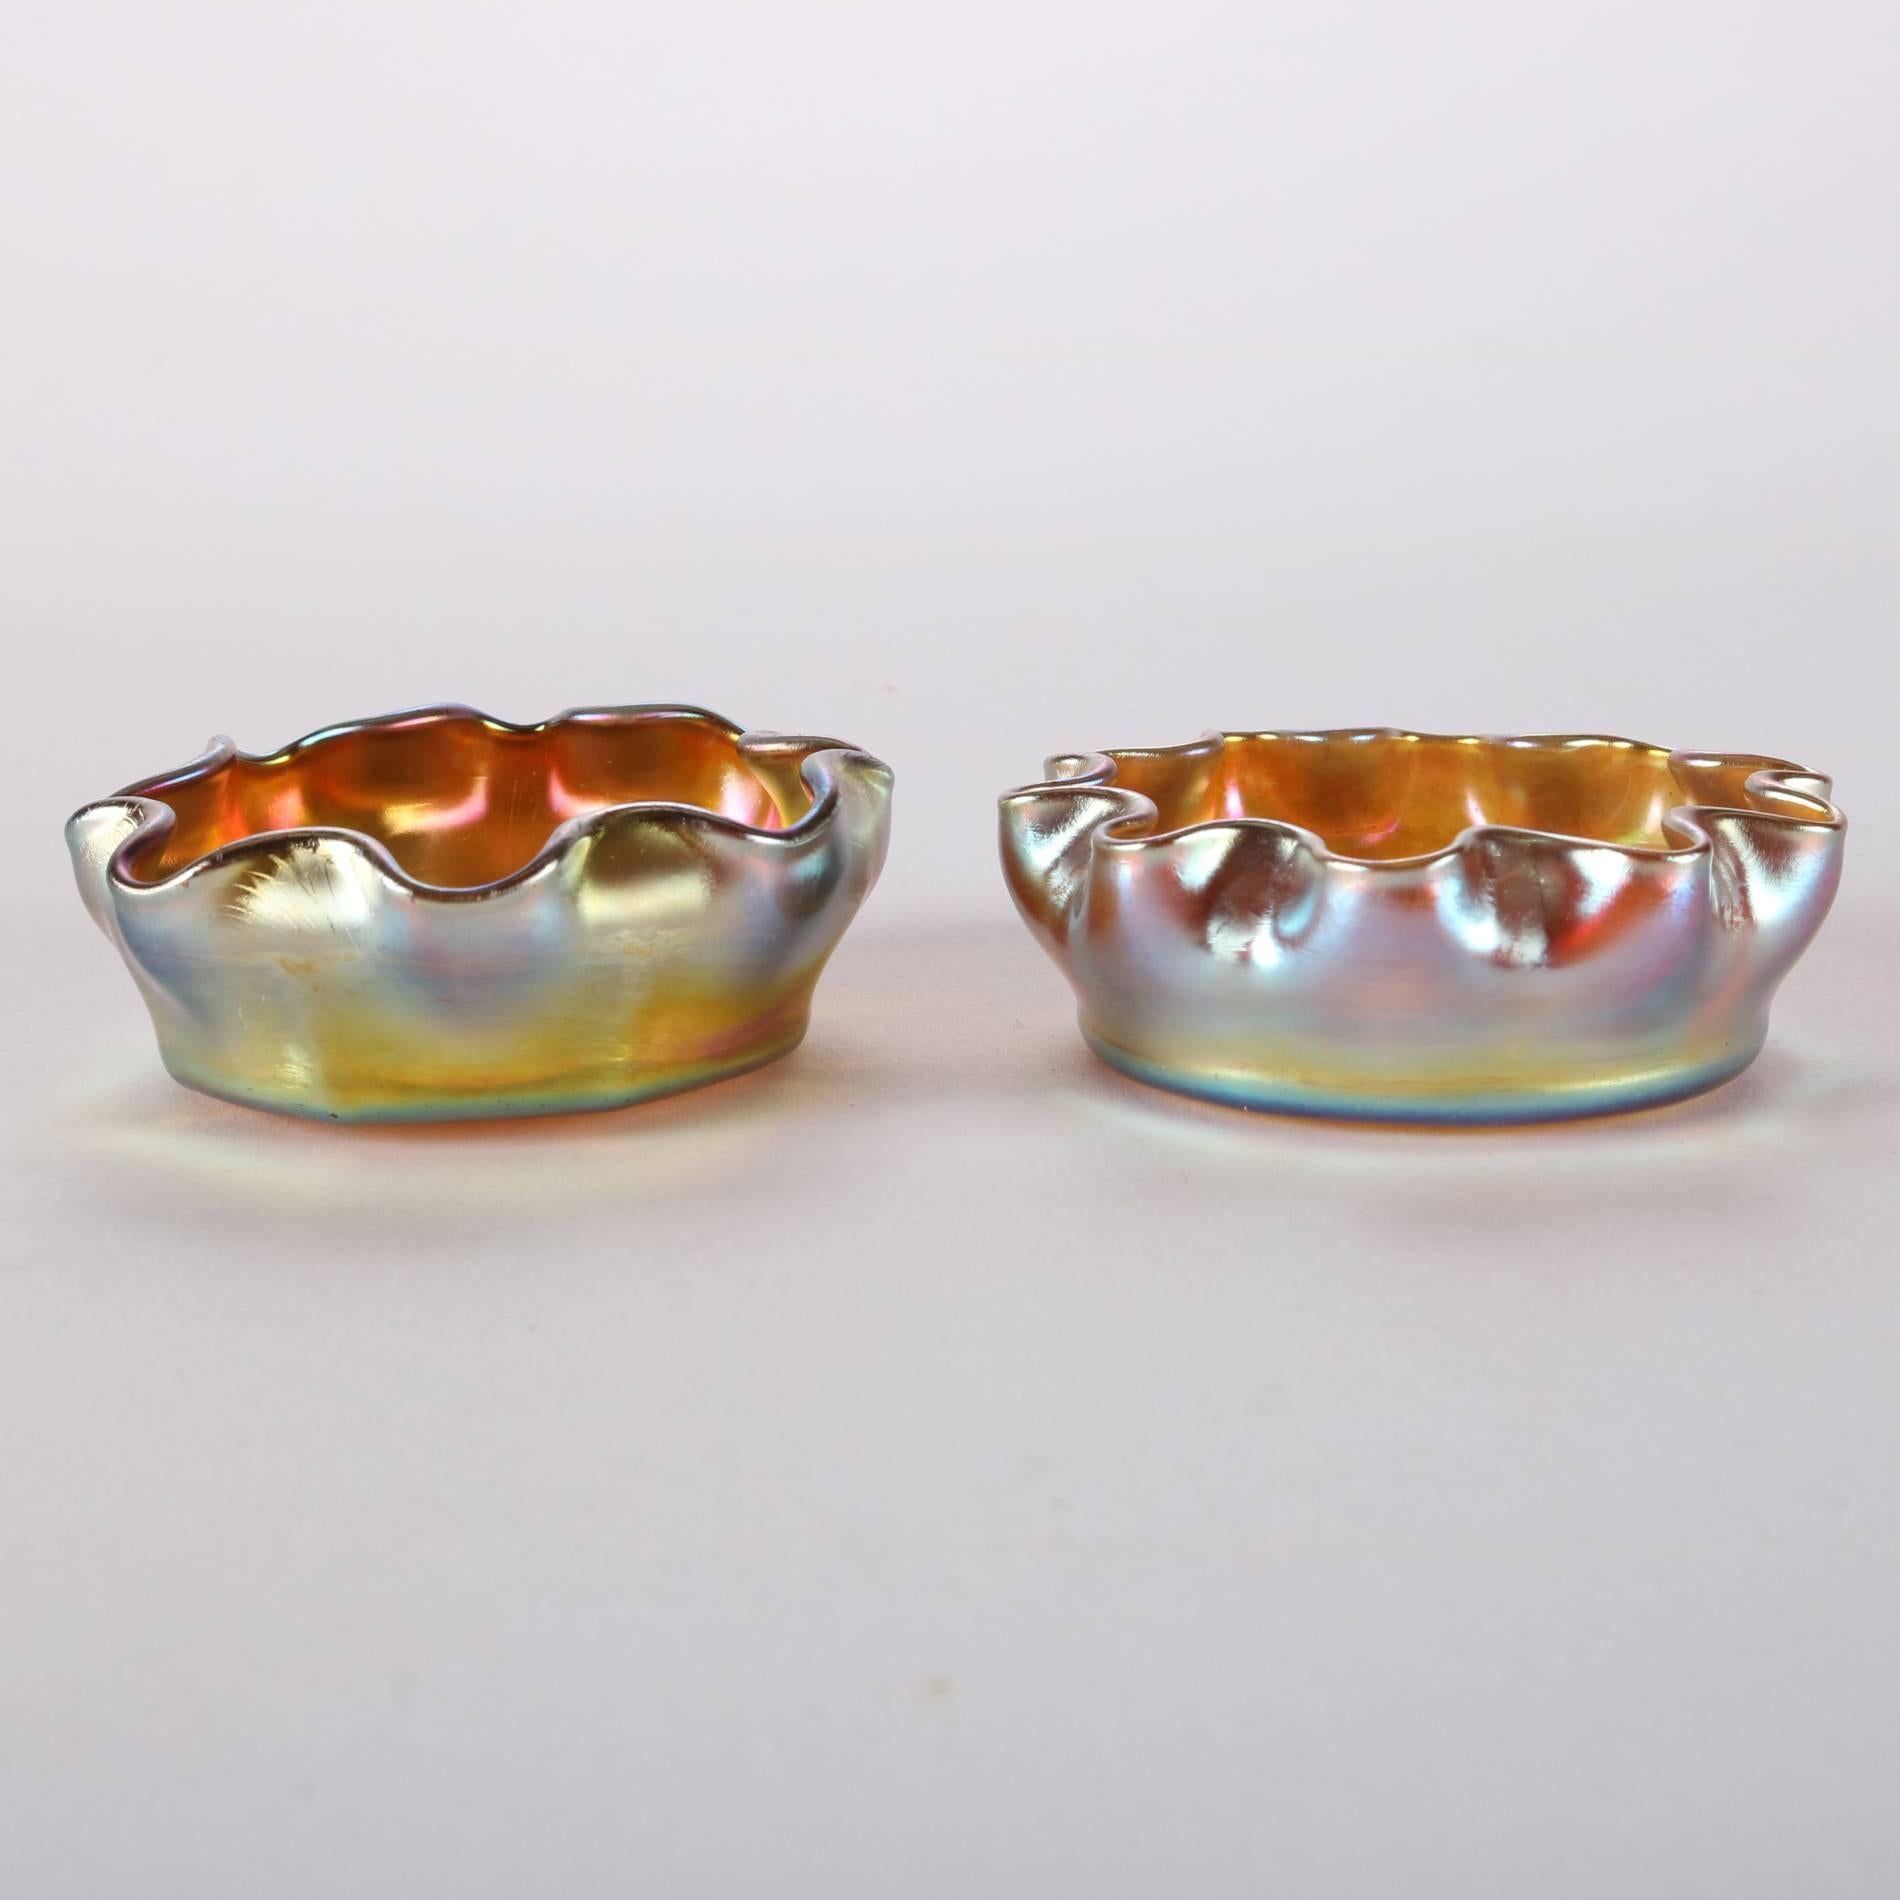 Hand-Carved Pair of Antique Louis Comfort Tiffany Gold Favrile Art Glass Salt Cellars